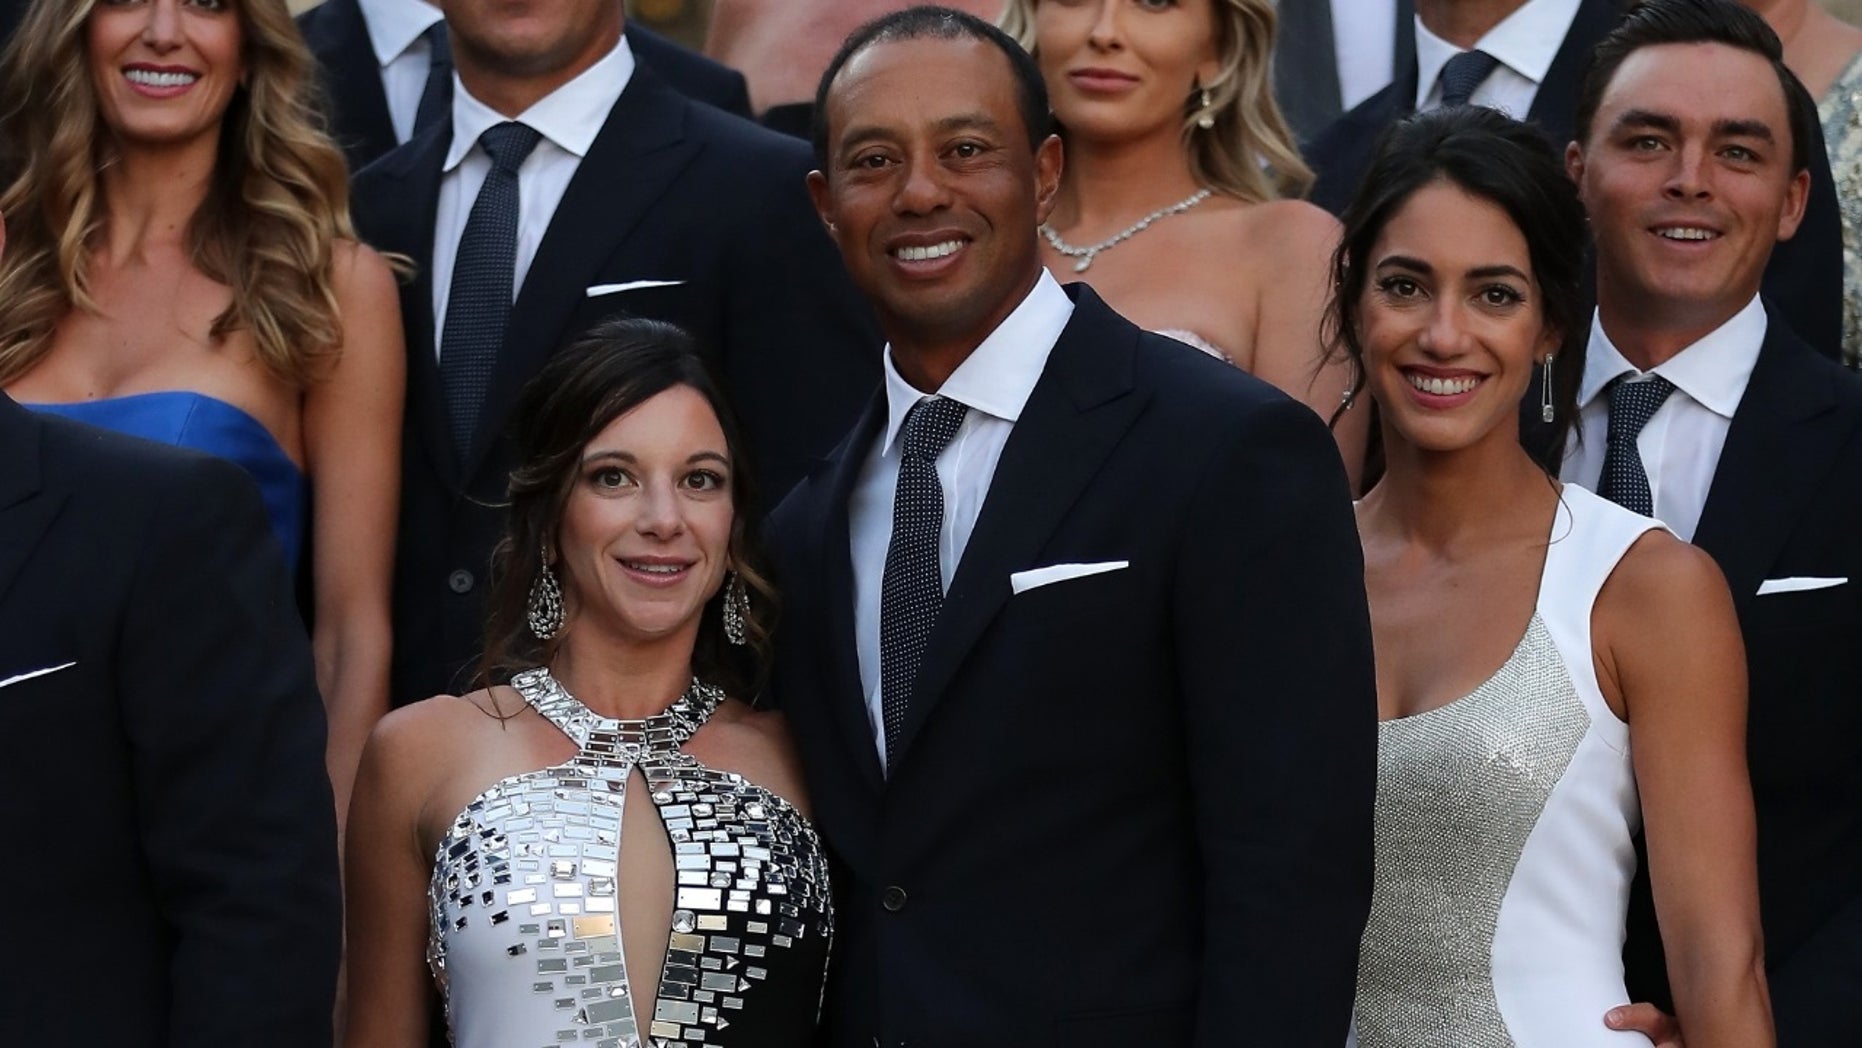 Tiger Woods and girlfriend Erica Herman get glammed up for Ryder Cup Gala | Fox News1862 x 1048